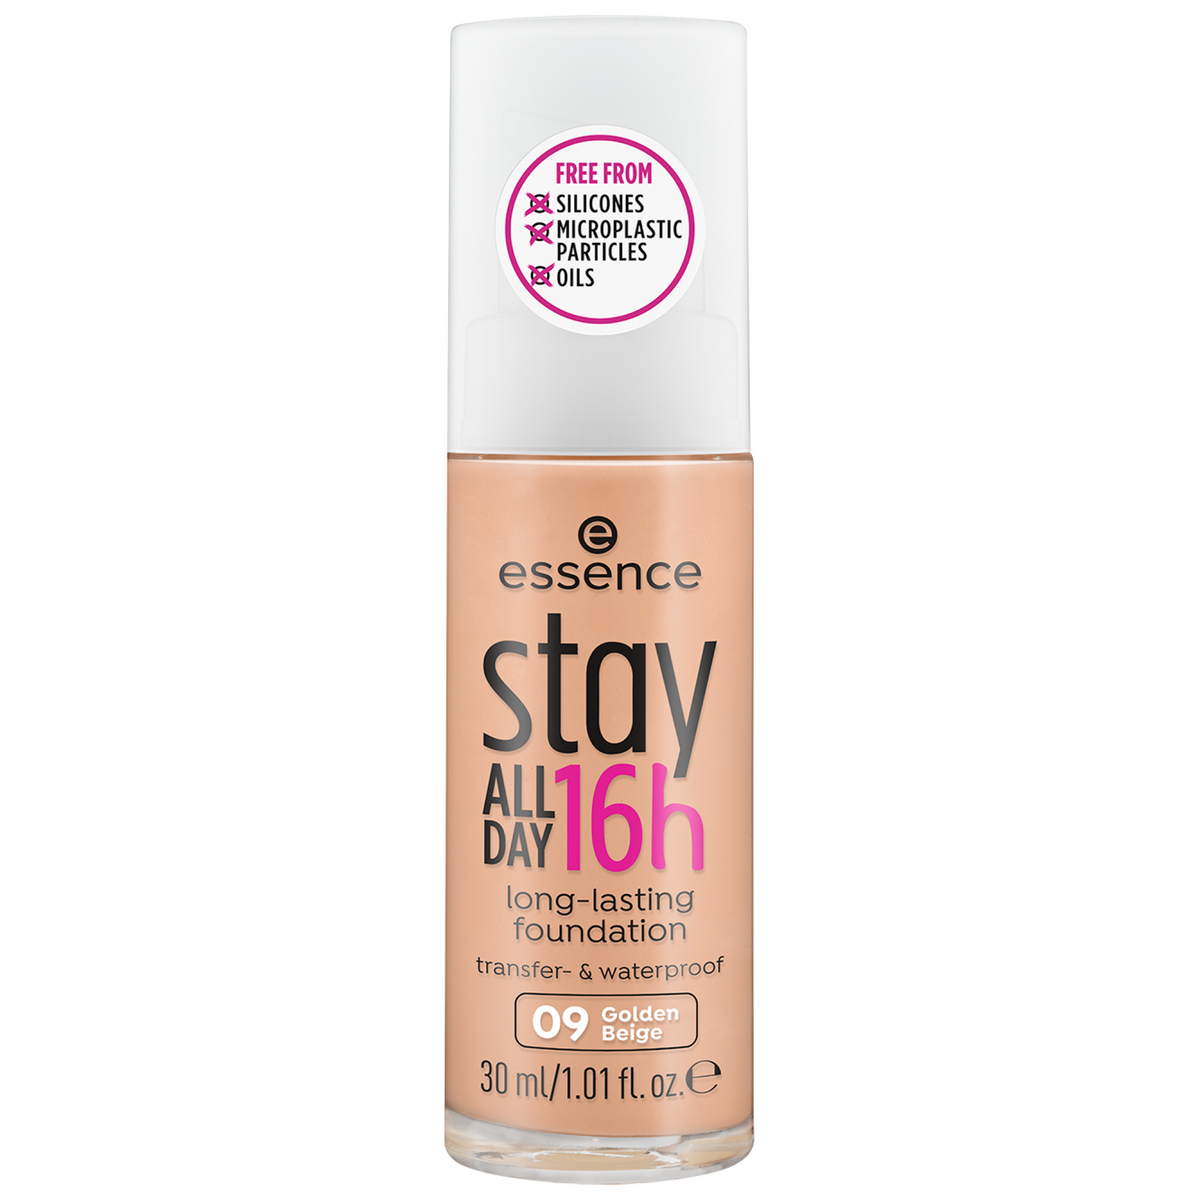 Essence - Stay All Day 16H Long lasting Foundation - 09 Golden Beige